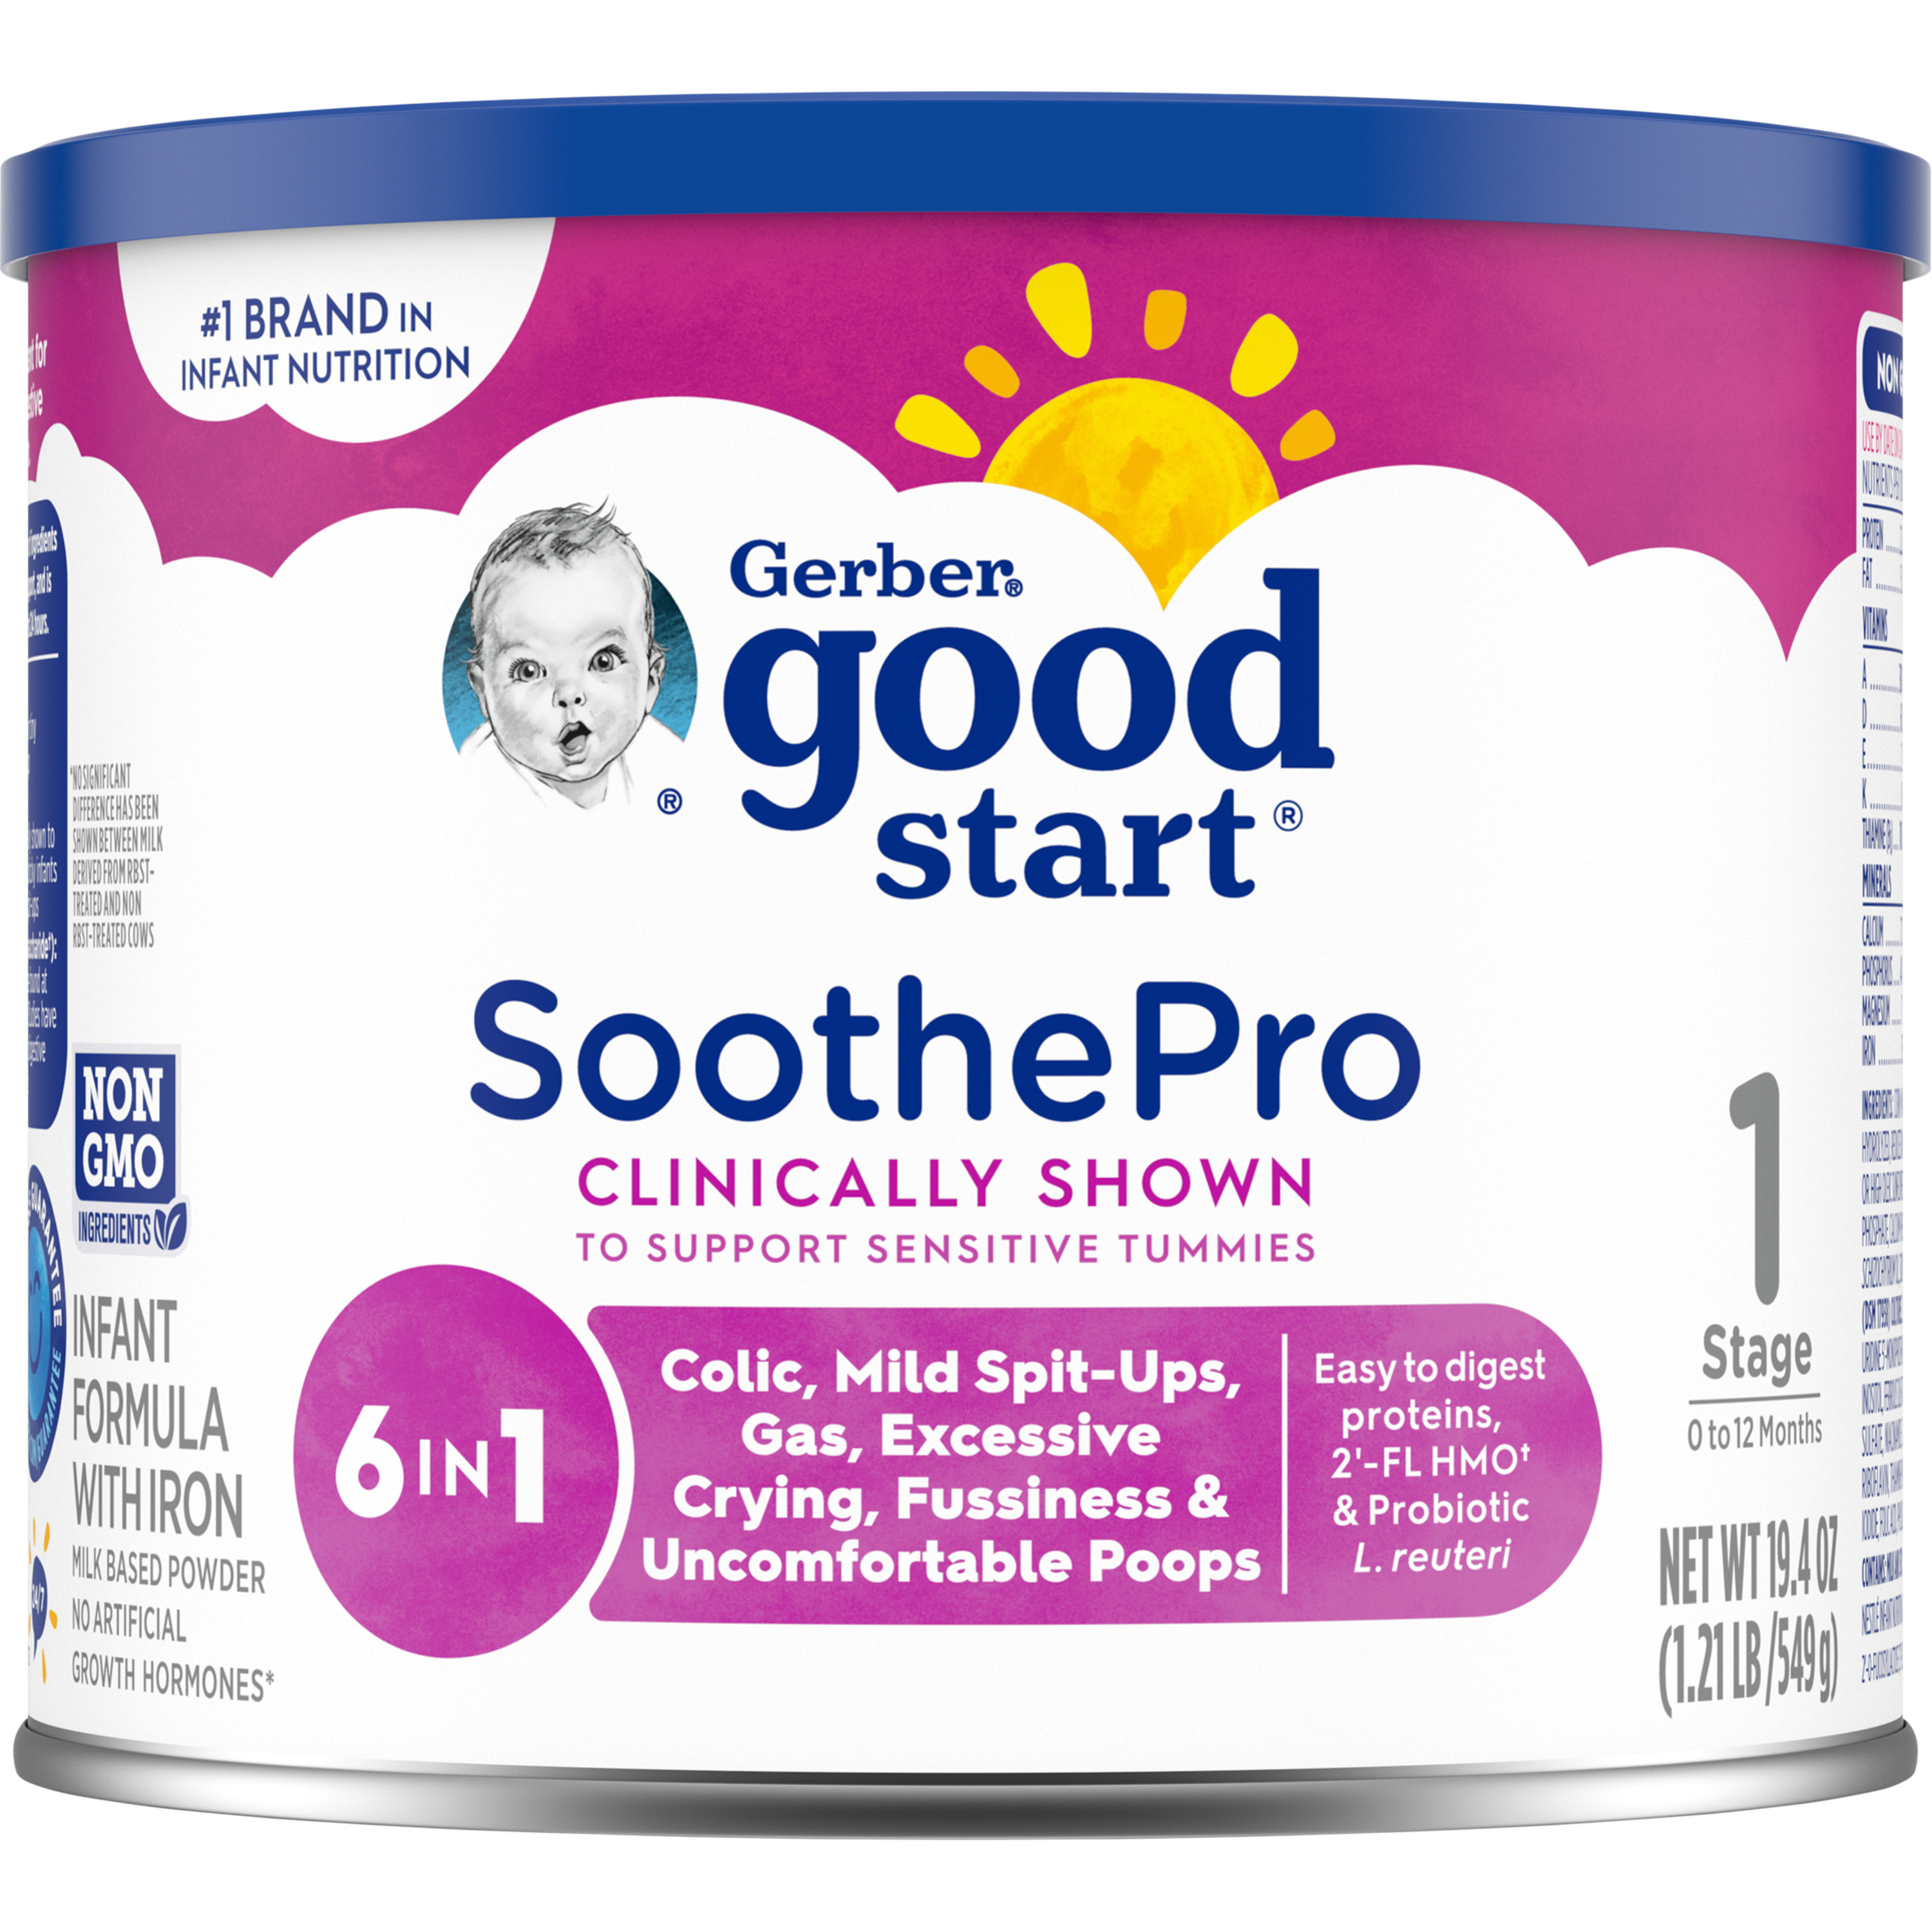 Gerber Good Start, Baby Formula Powder, SoothePro, Stage 1, 19.4 Ounce - image 1 of 12